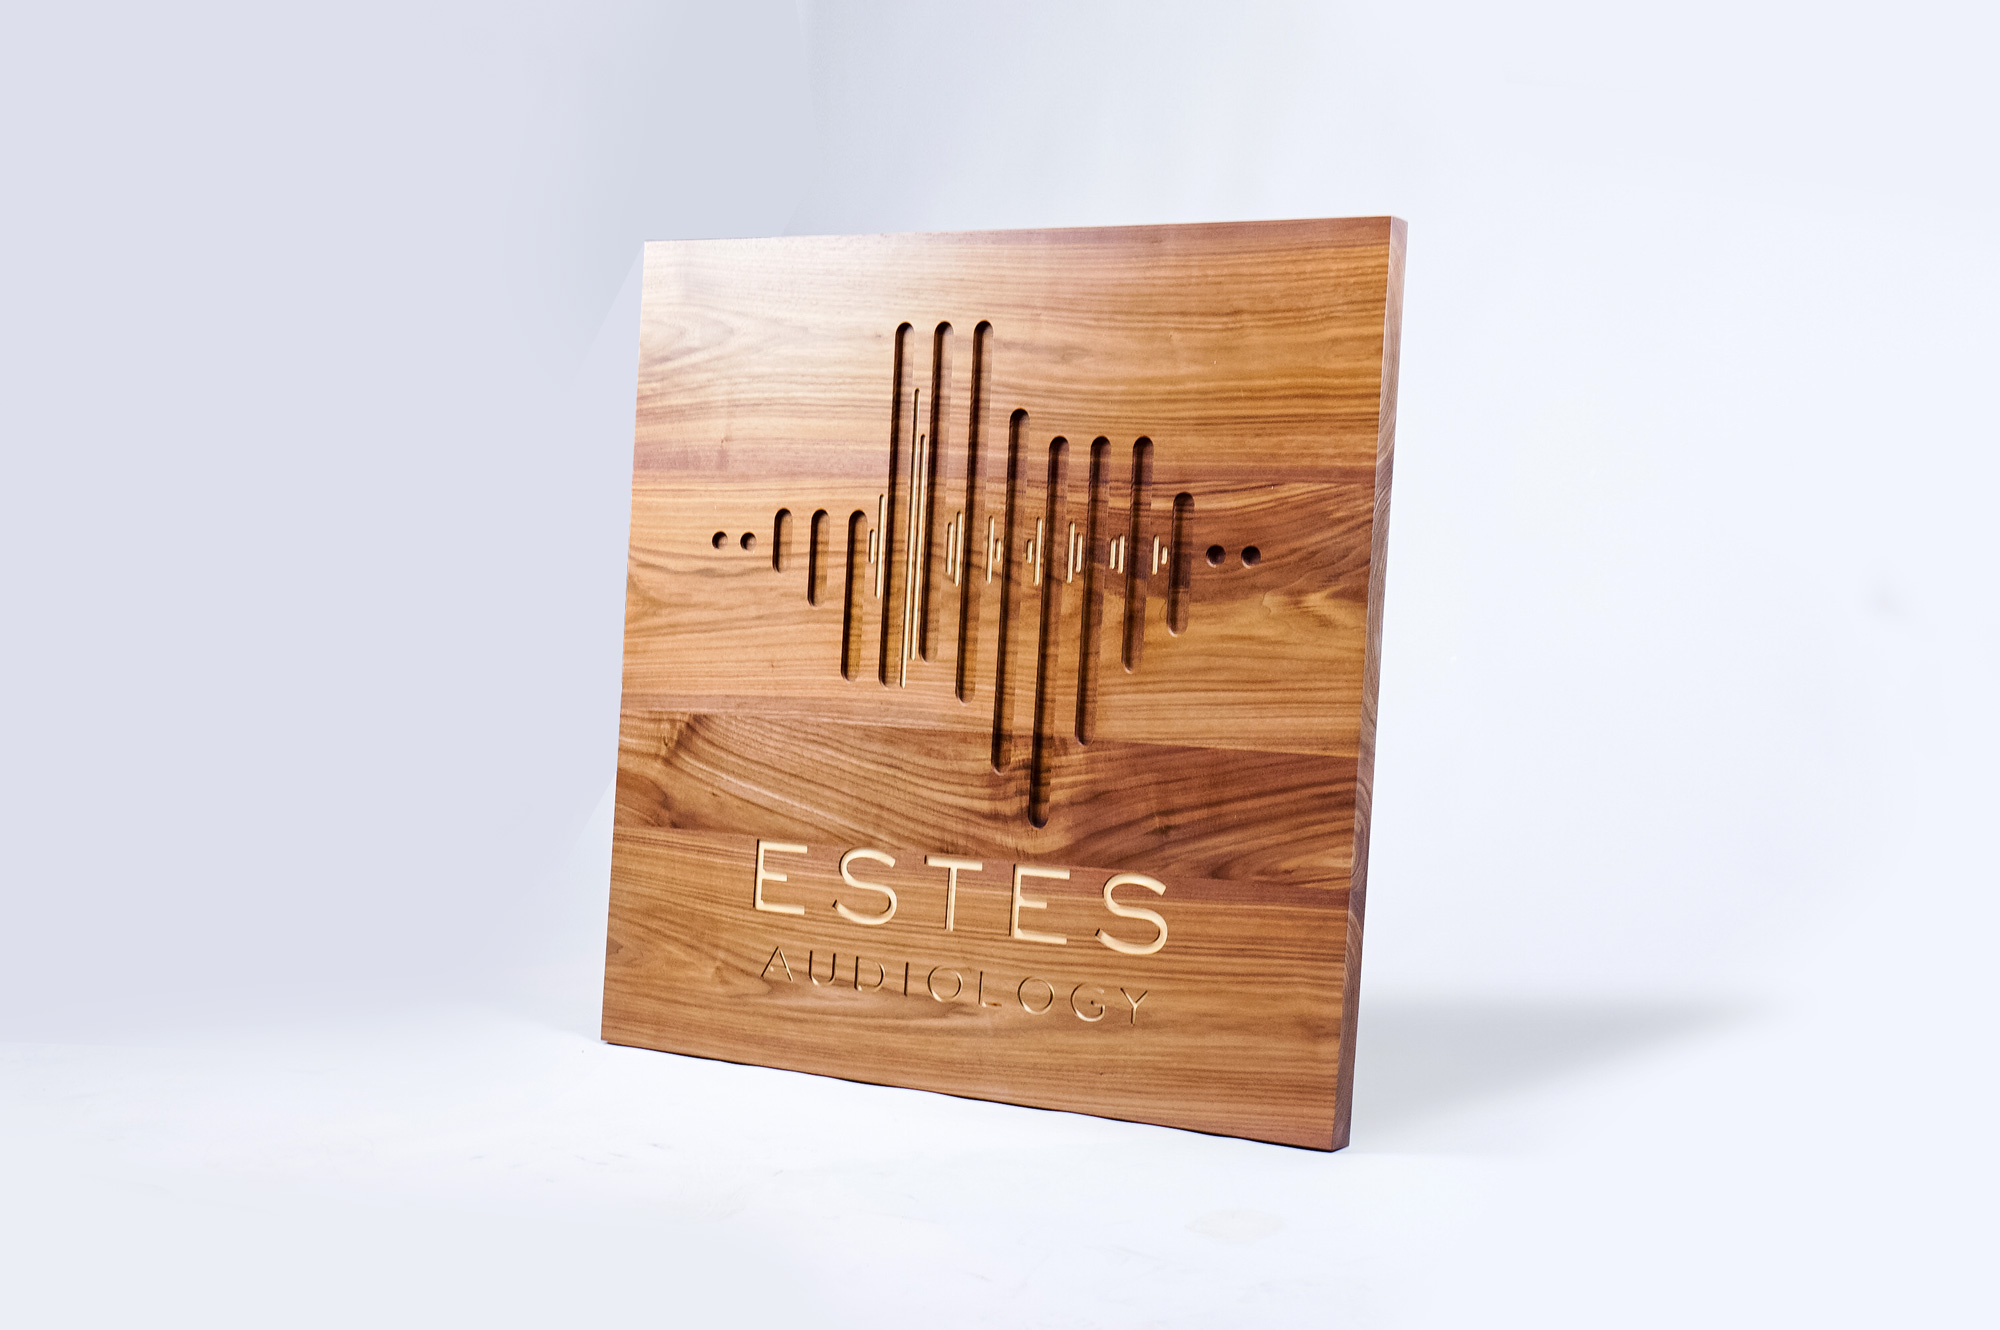 Solid walnut sign with engraved and inlaid logo for Estes Audiology, one of the largest independent hearing device practices in the Texas Hill Country.